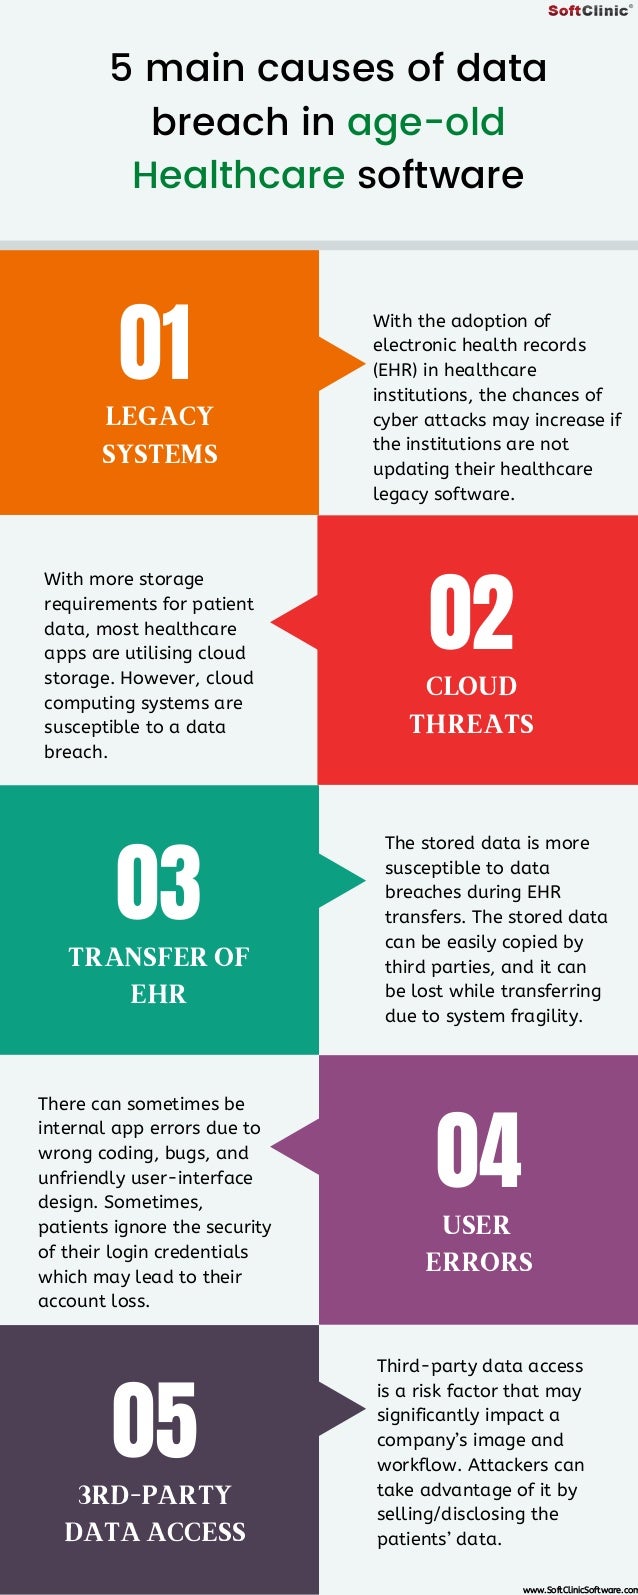 5 main causes of data
breach in age-old
Healthcare software


01
02
03
04
05
With the adoption of
electronic health records
(EHR) in healthcare
institutions, the chances of
cyber attacks may increase if
the institutions are not
updating their healthcare
legacy software.
With more storage
requirements for patient
data, most healthcare
apps are utilising cloud
storage. However, cloud
computing systems are
susceptible to a data
breach.
The stored data is more
susceptible to data
breaches during EHR
transfers. The stored data
can be easily copied by
third parties, and it can
be lost while transferring
due to system fragility.
There can sometimes be
internal app errors due to
wrong coding, bugs, and
unfriendly user-interface
design. Sometimes,
patients ignore the security
of their login credentials
which may lead to their
account loss.
Third-party data access
is a risk factor that may
significantly impact a
company’s image and
workflow. Attackers can
take advantage of it by
selling/disclosing the
patients’ data.
LEGACY
SYSTEMS
CLOUD
THREATS
TRANSFER OF
EHR
USER
ERRORS
3RD-PARTY
DATA ACCESS
www.SoftClinicSoftware.com
 